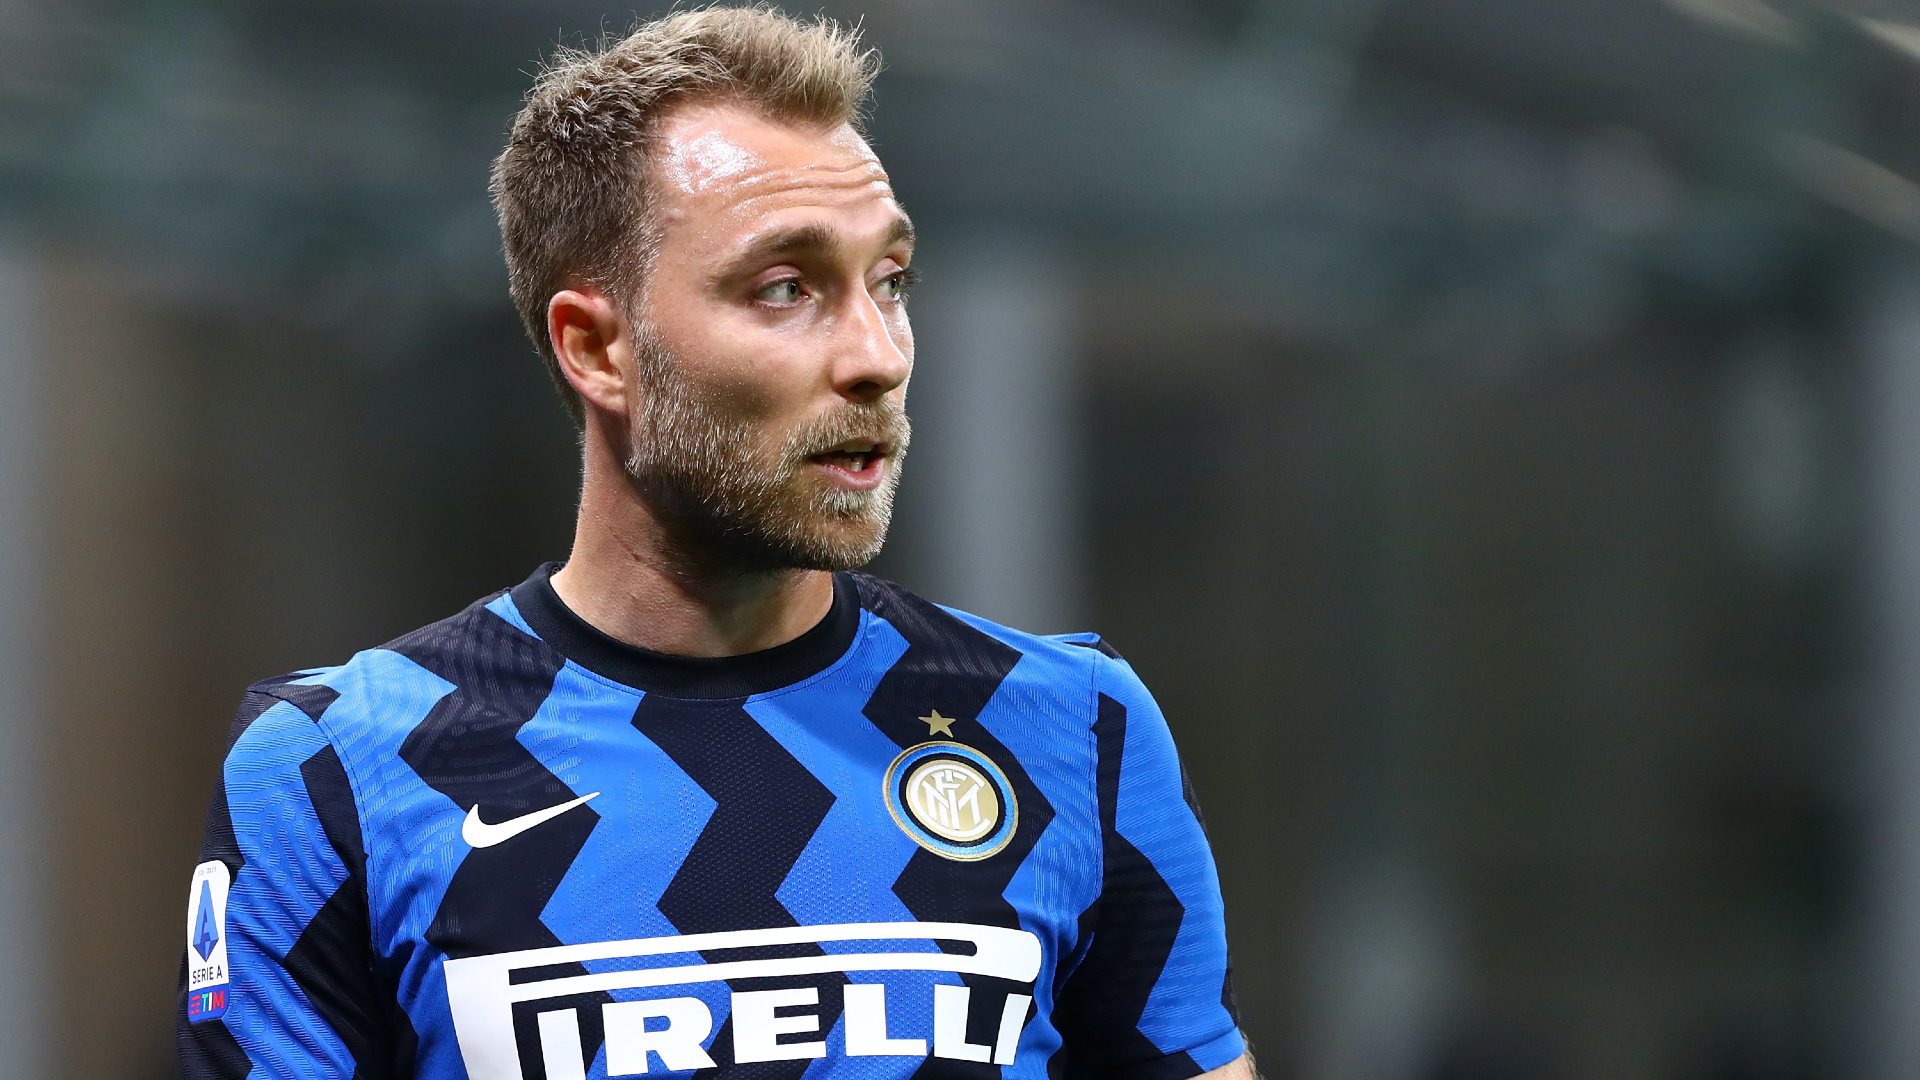 Eriksen set to leave Inter as CEO Marotta confirms midfielder is available for transfer